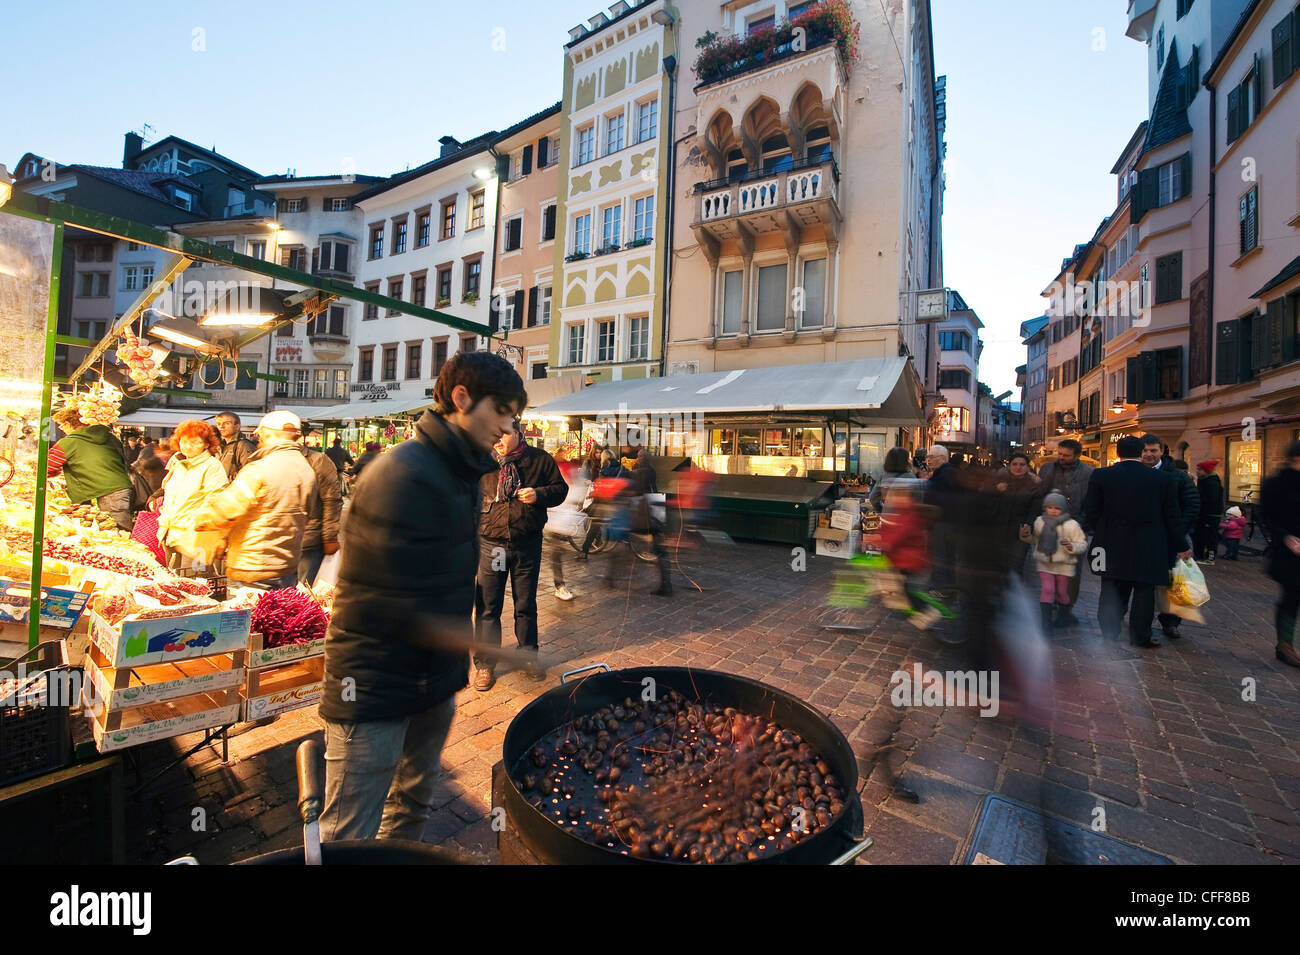 People on the street at the old town in the evening, Bolzano, South Tyrol, Alto Adige, Italy, Europe Stock Photo